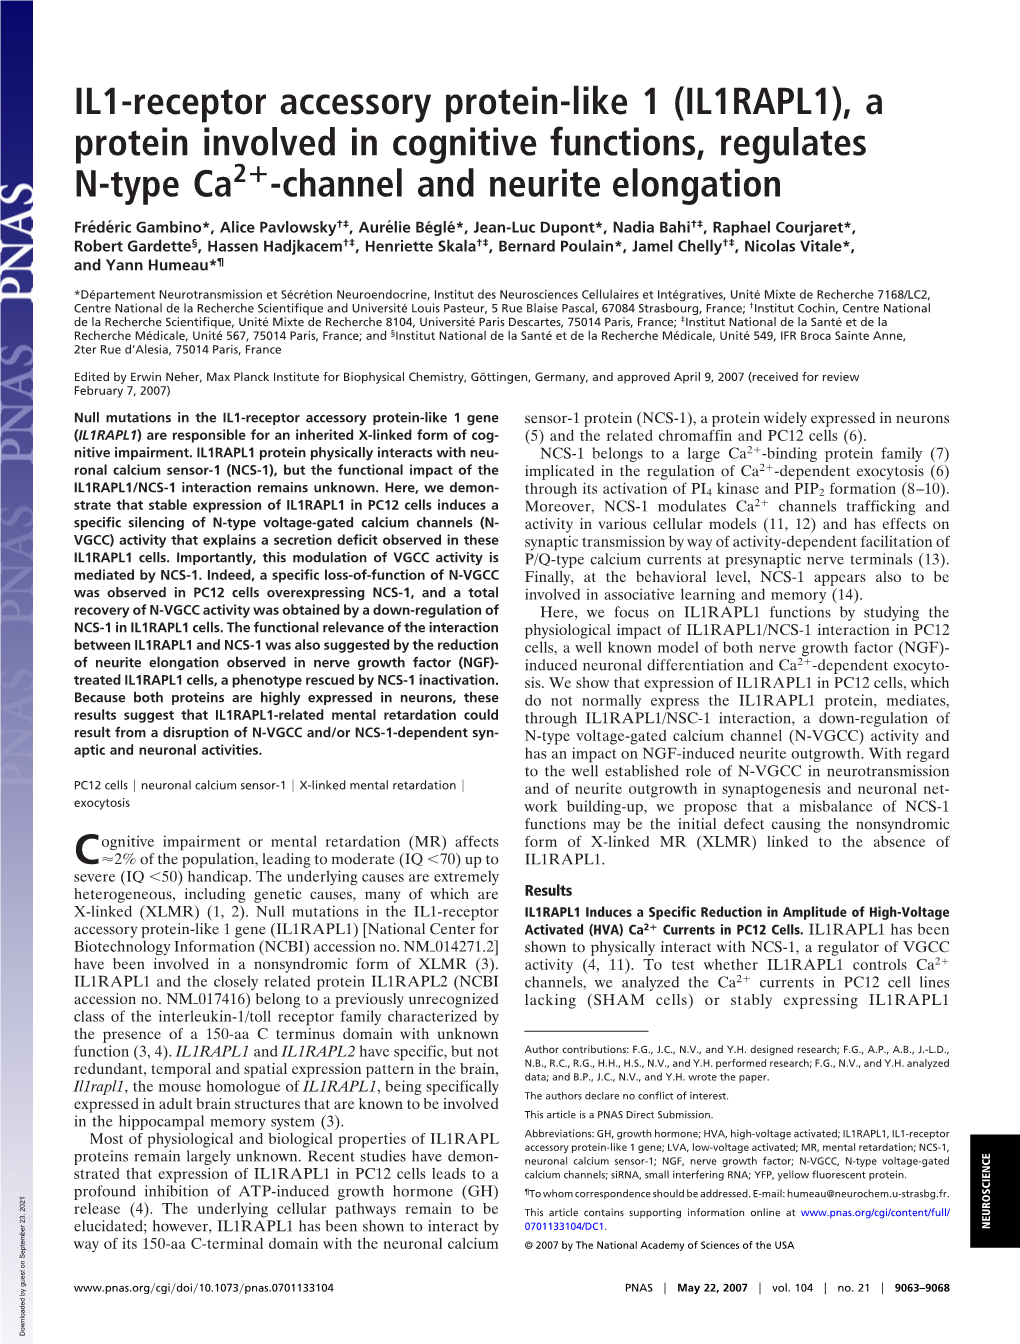 IL1-Receptor Accessory Protein-Like 1 (IL1RAPL1), a Protein Involved in Cognitive Functions, Regulates N-Type Ca2؉-Channel and Neurite Elongation